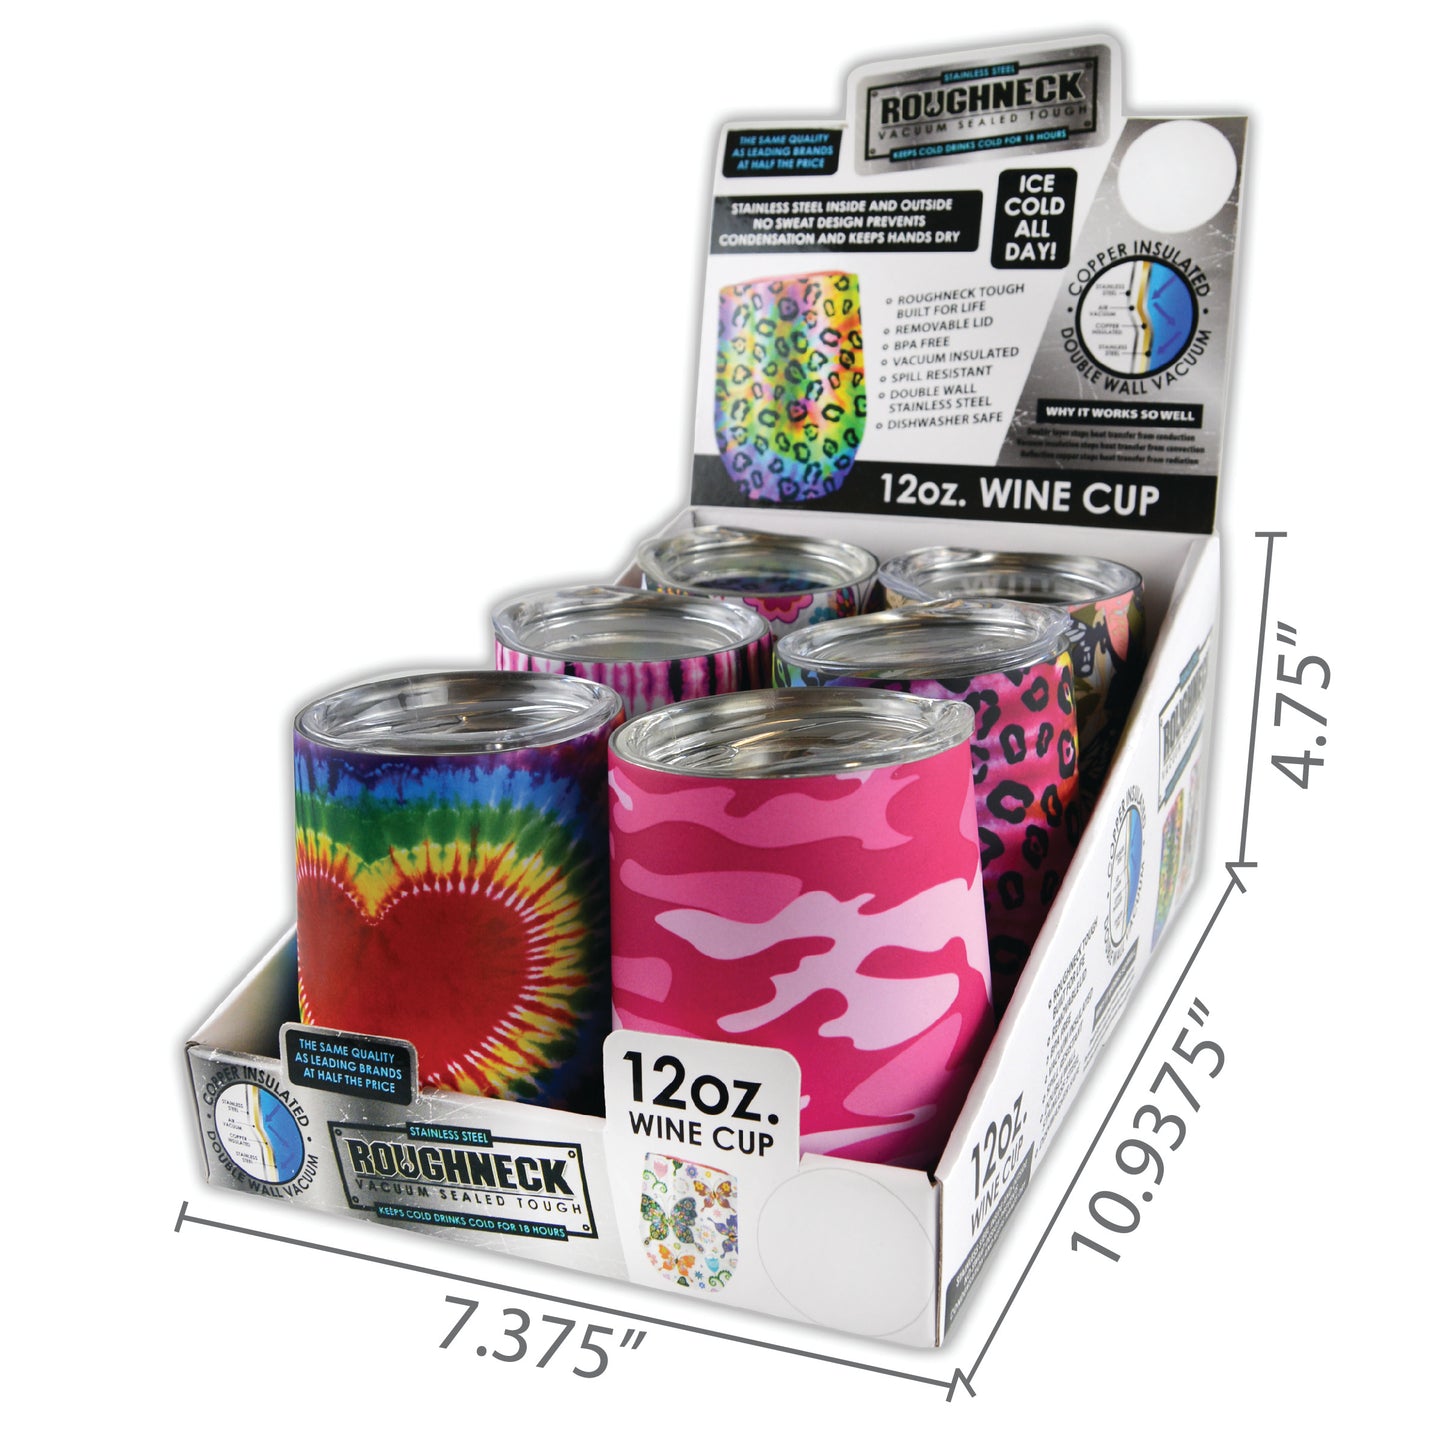 ITEM NUMBER 022265 WINE CUP MIX A PATTERNS 6 PIECES PER DISPLAY